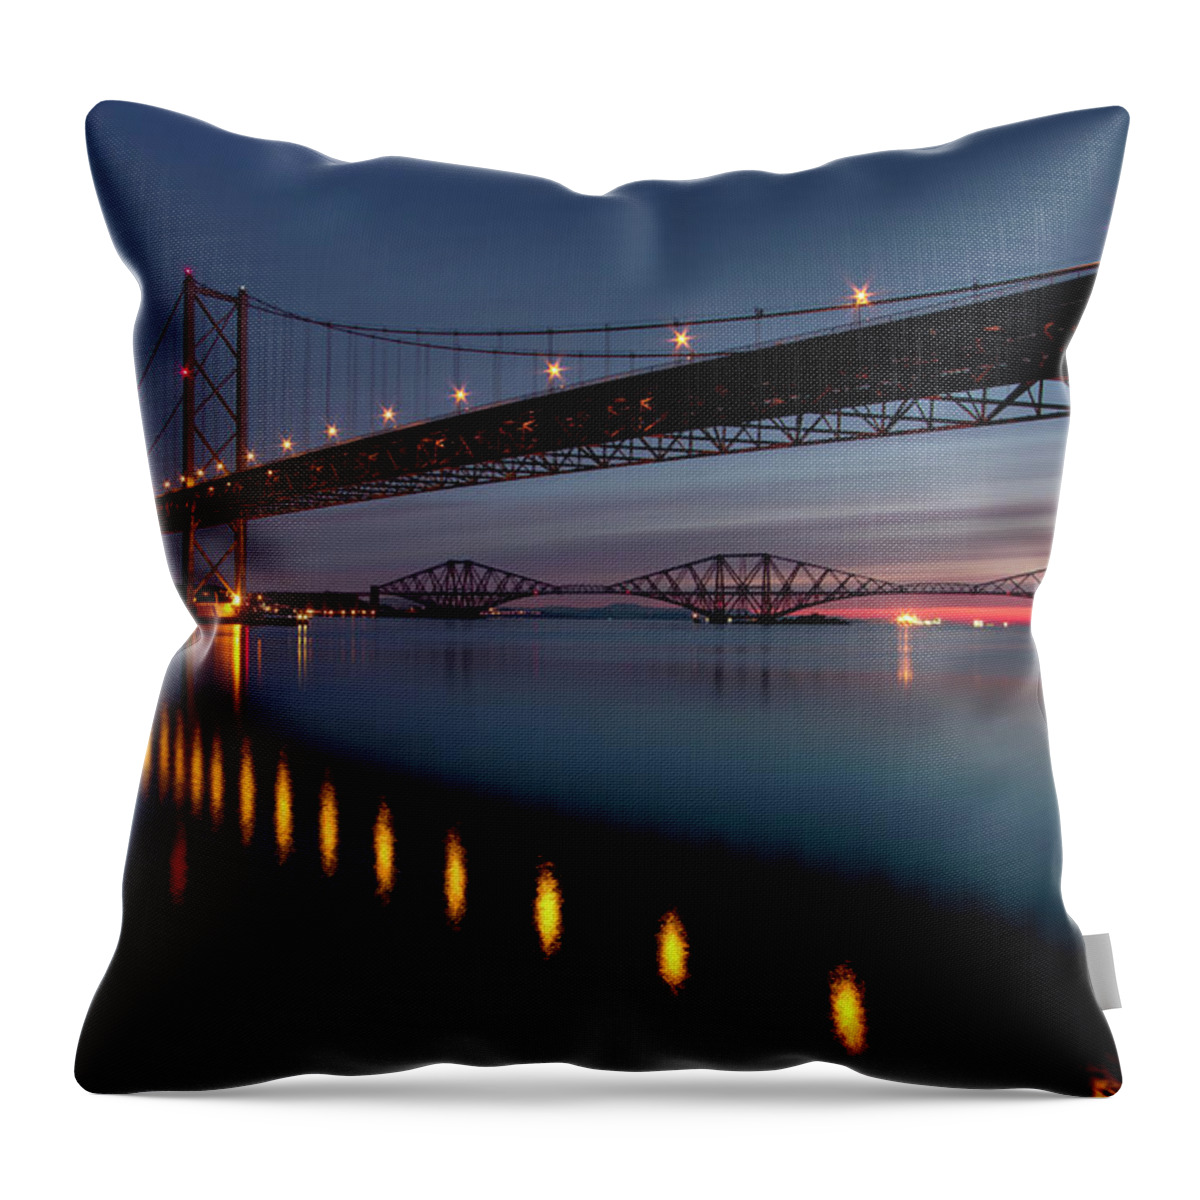 Tranquility Throw Pillow featuring the photograph Two Bridges During Dawn by Gettyimages